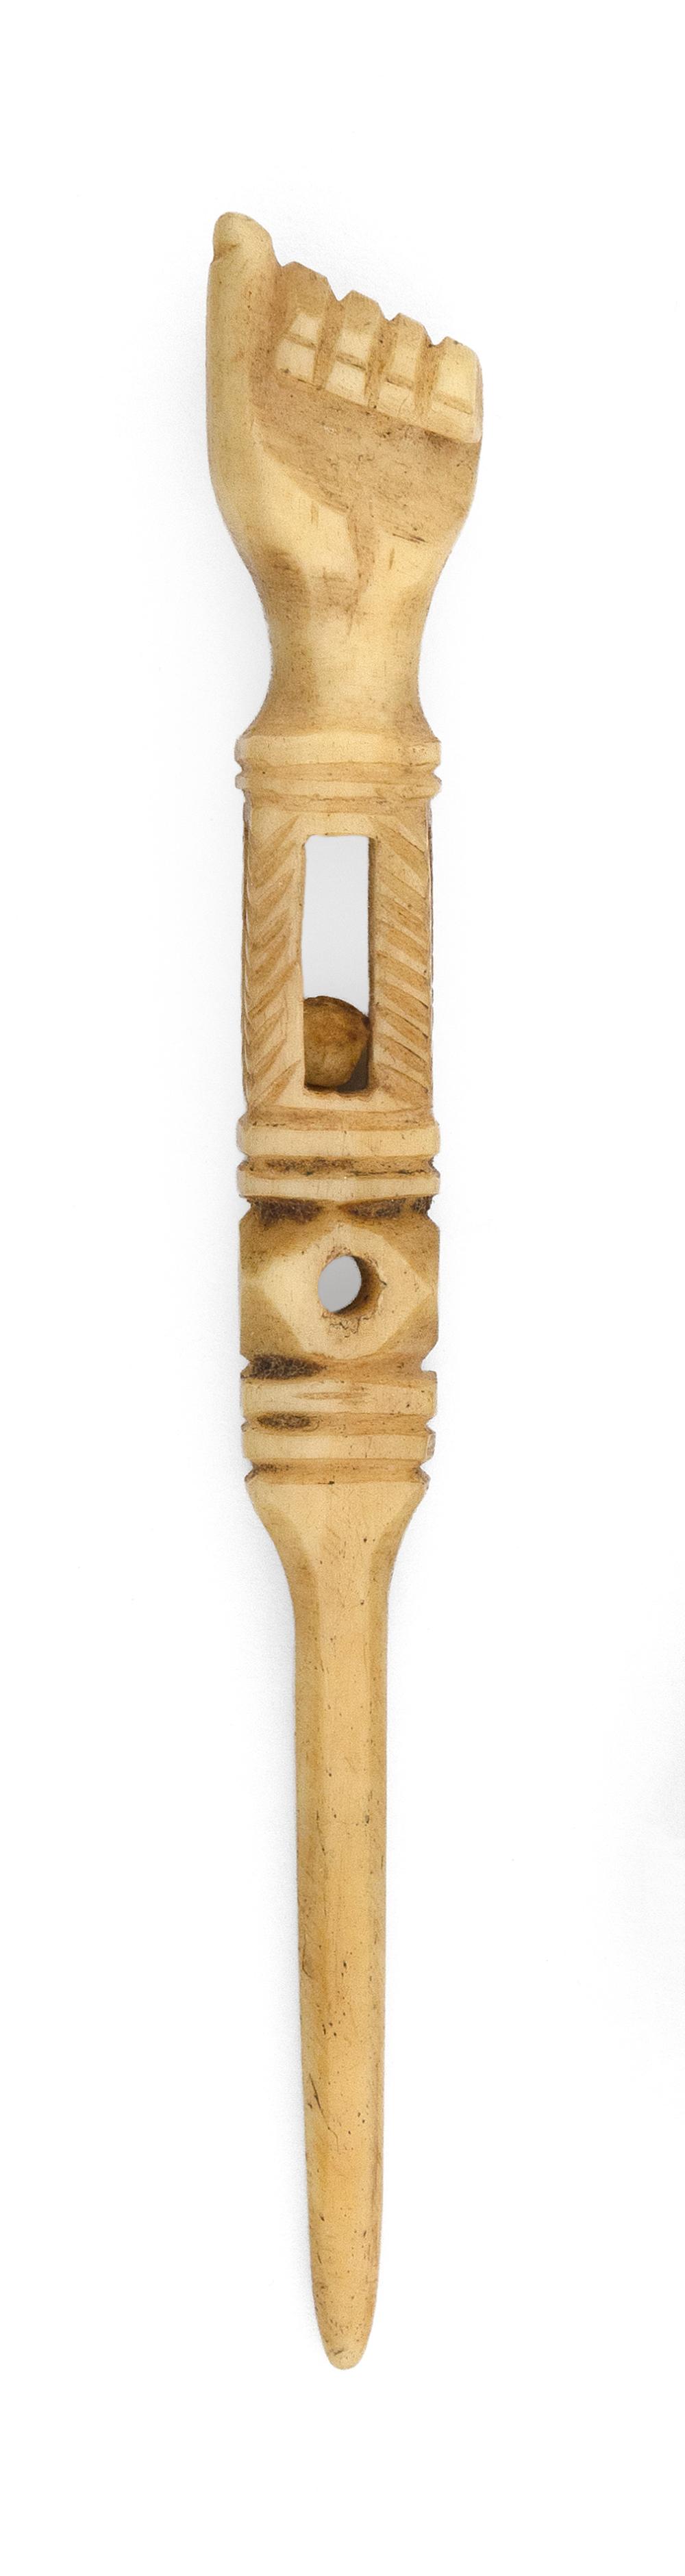 EXTENSIVELY CARVED WHALE IVORY